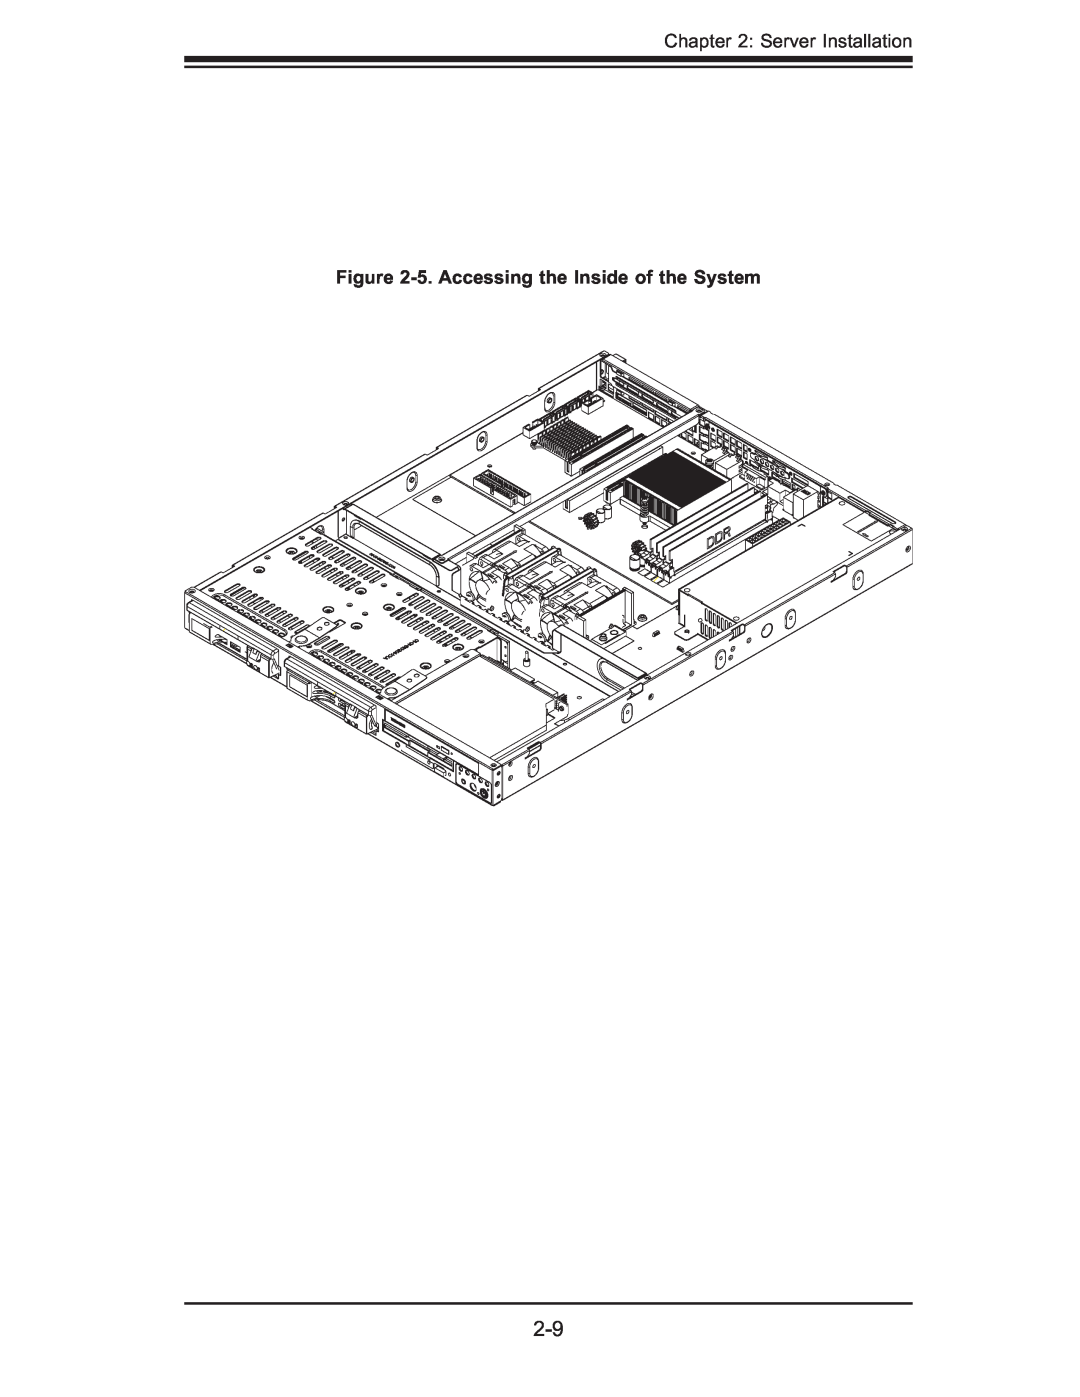 SUPER MICRO Computer AS1011M-T2 user manual Server Installation, 5. Accessing the Inside of the System 